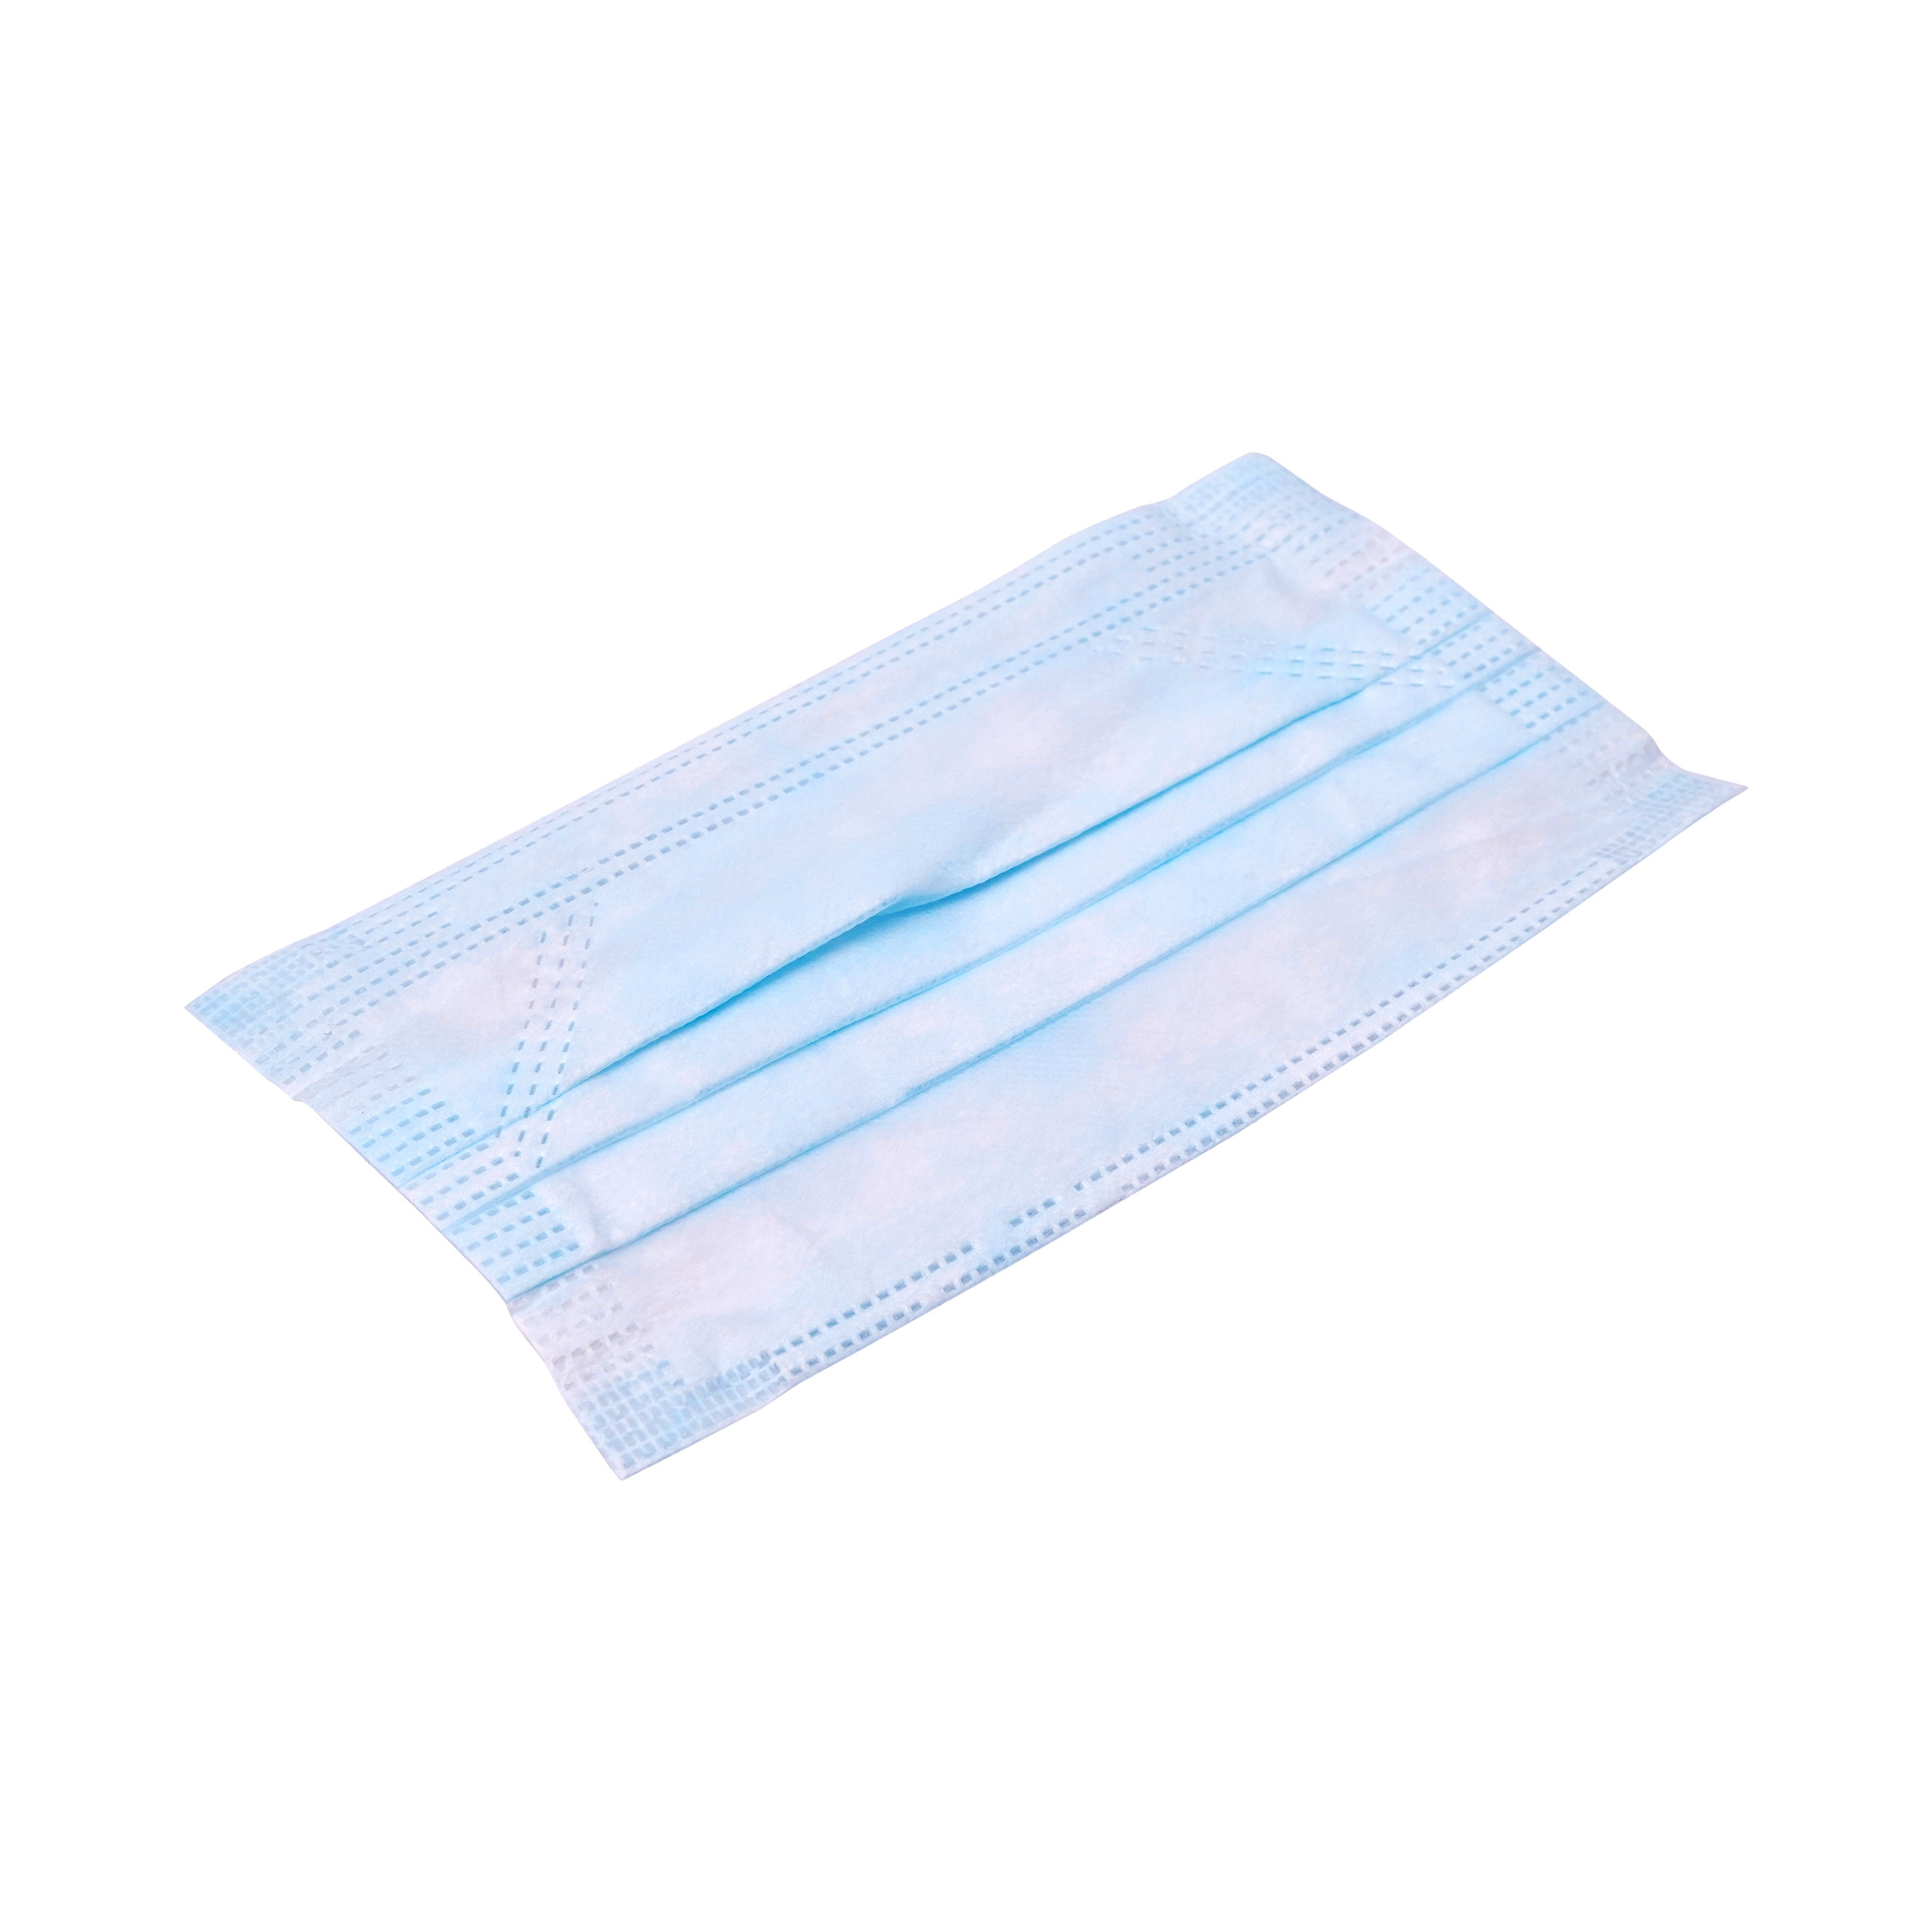 Romsons Disposable Face Mask Box Of 50